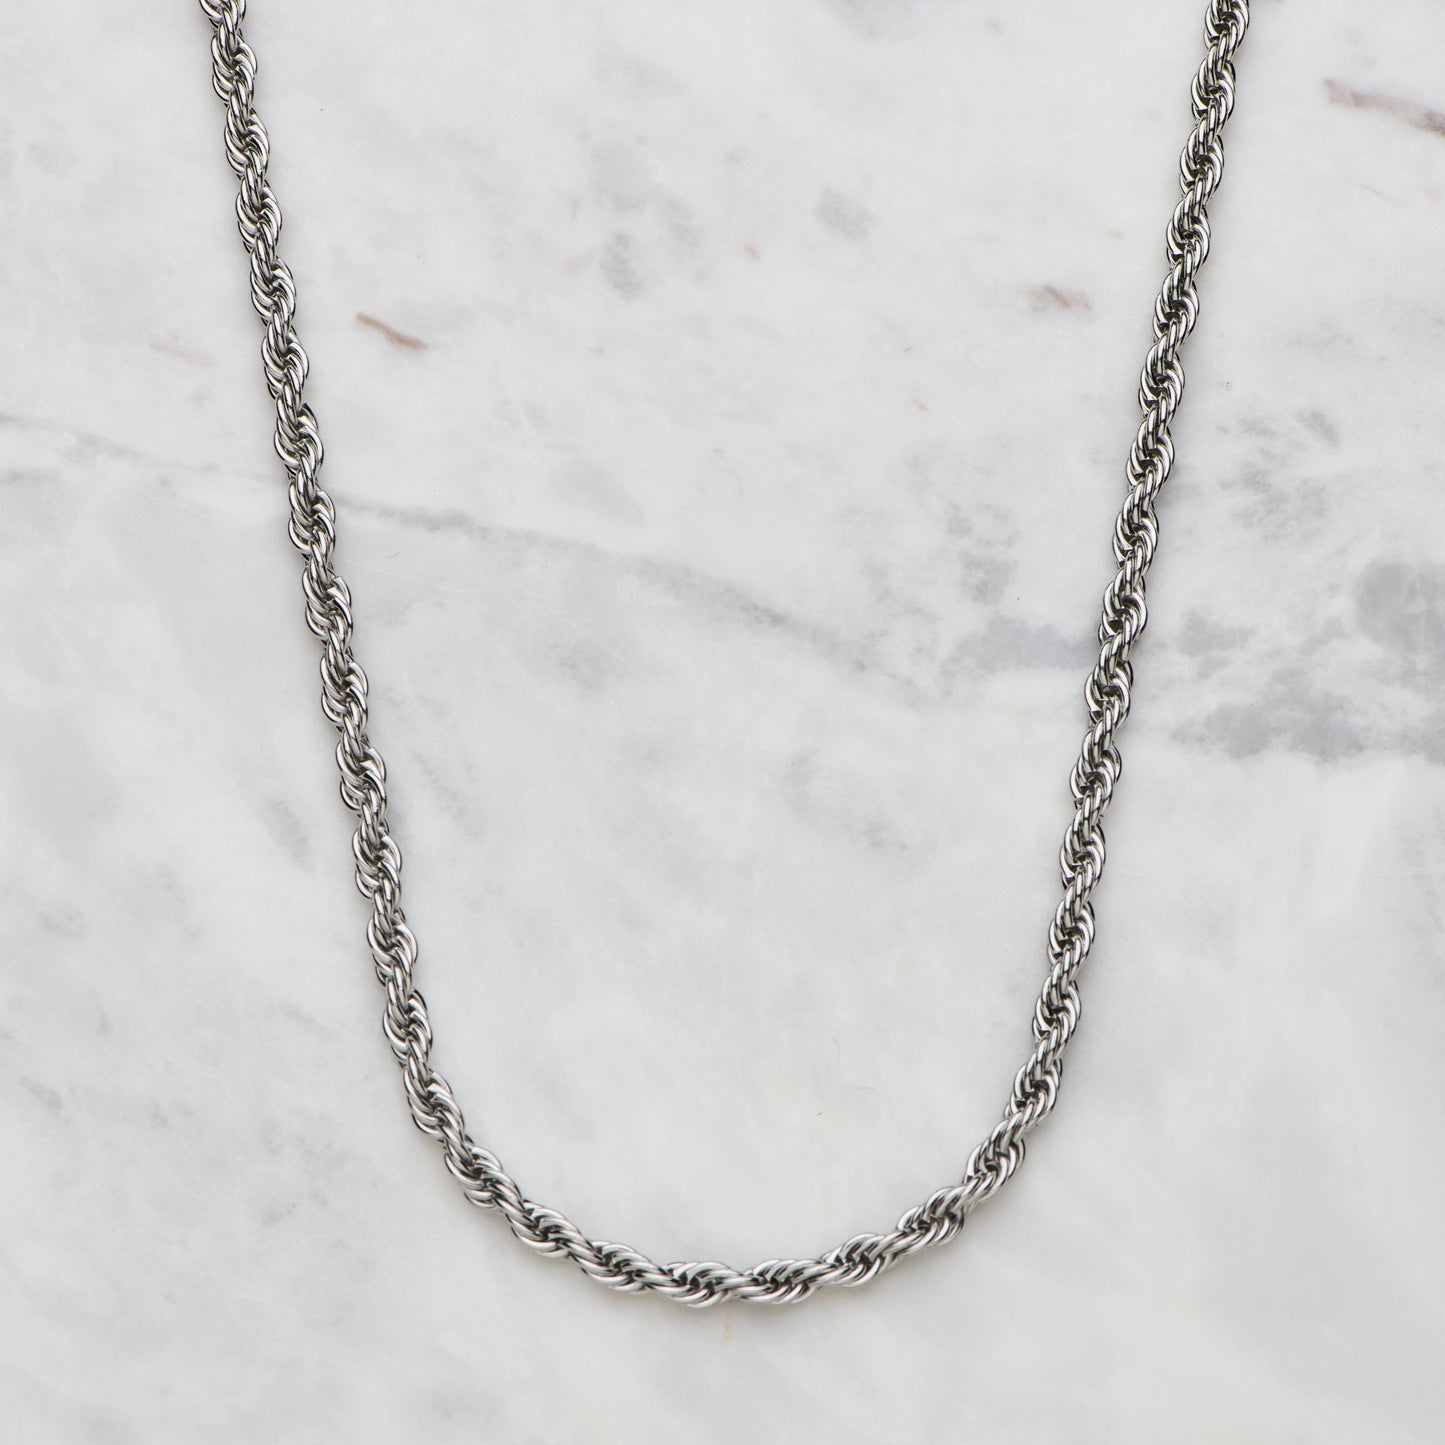 Rope Chain Set - Silver